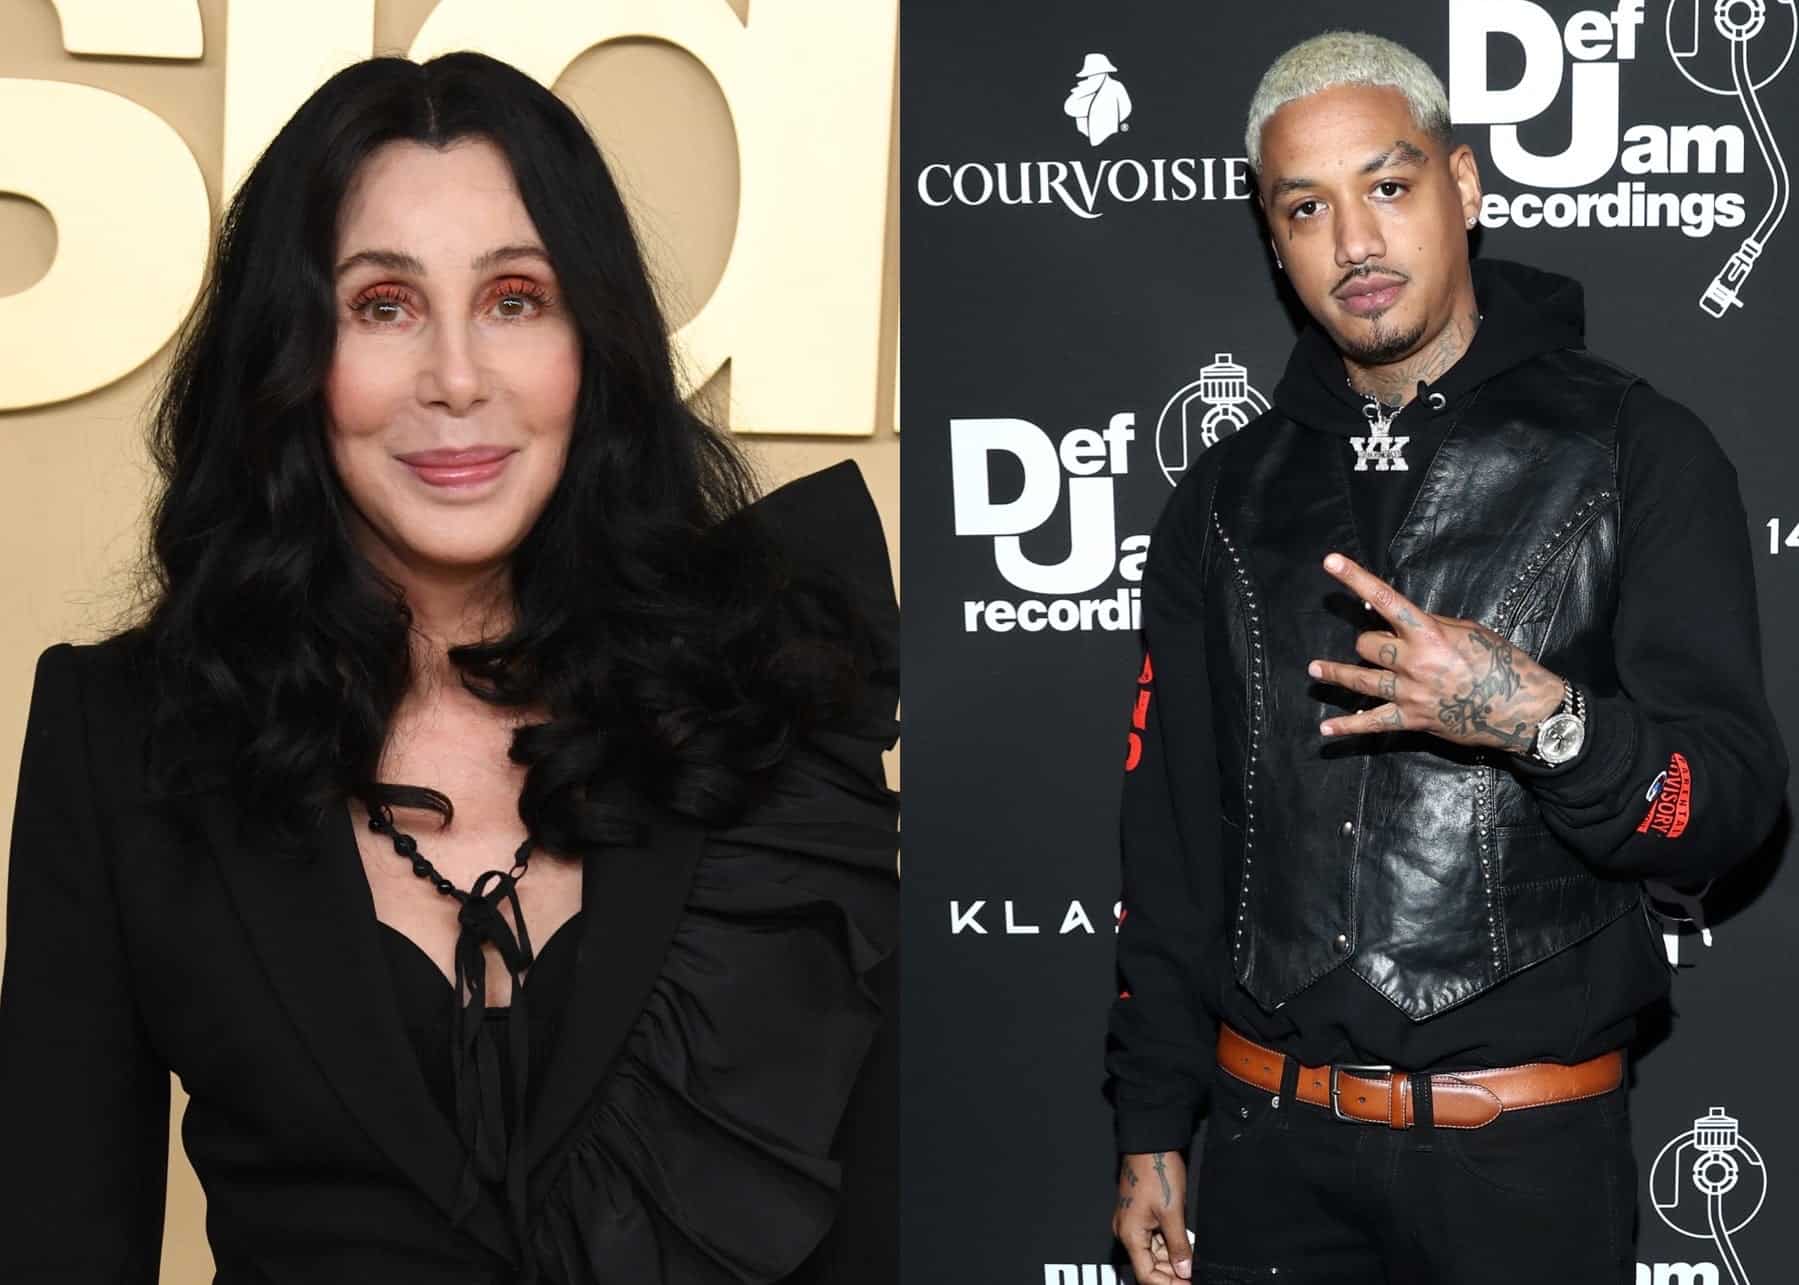 Cher Holds Hands With Amber Rose's Baby Daddy After Hanging With Tyga